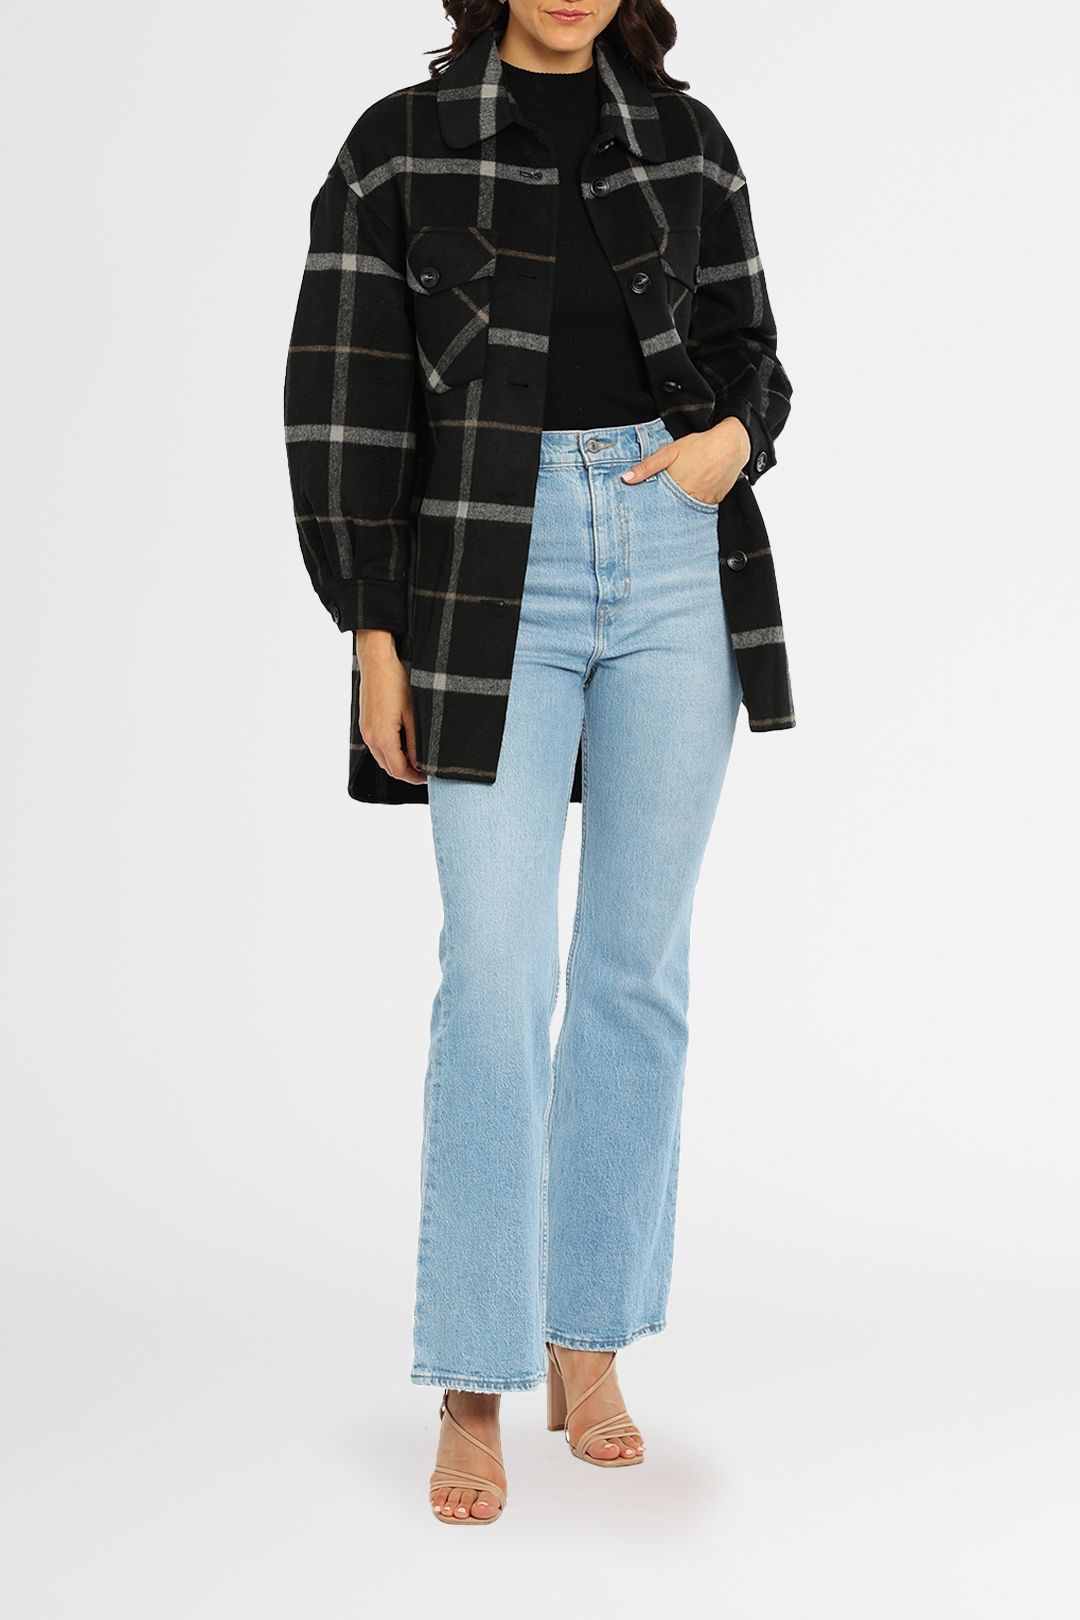 Belle and Bloom River’s Edge Plaid Shacket Black